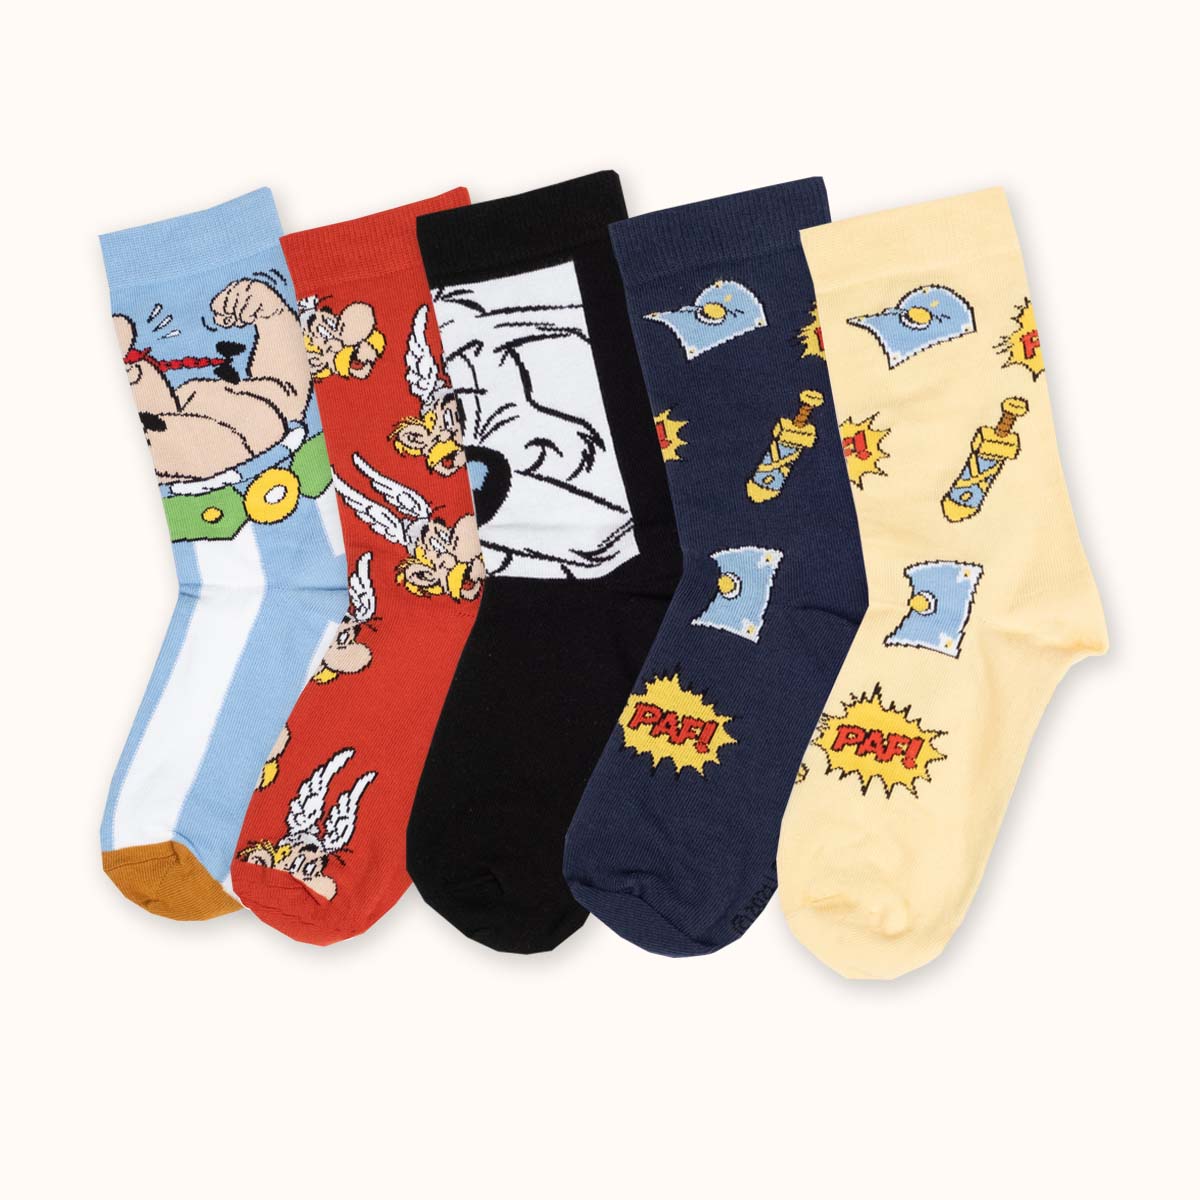 Asterix & Obelix Collection